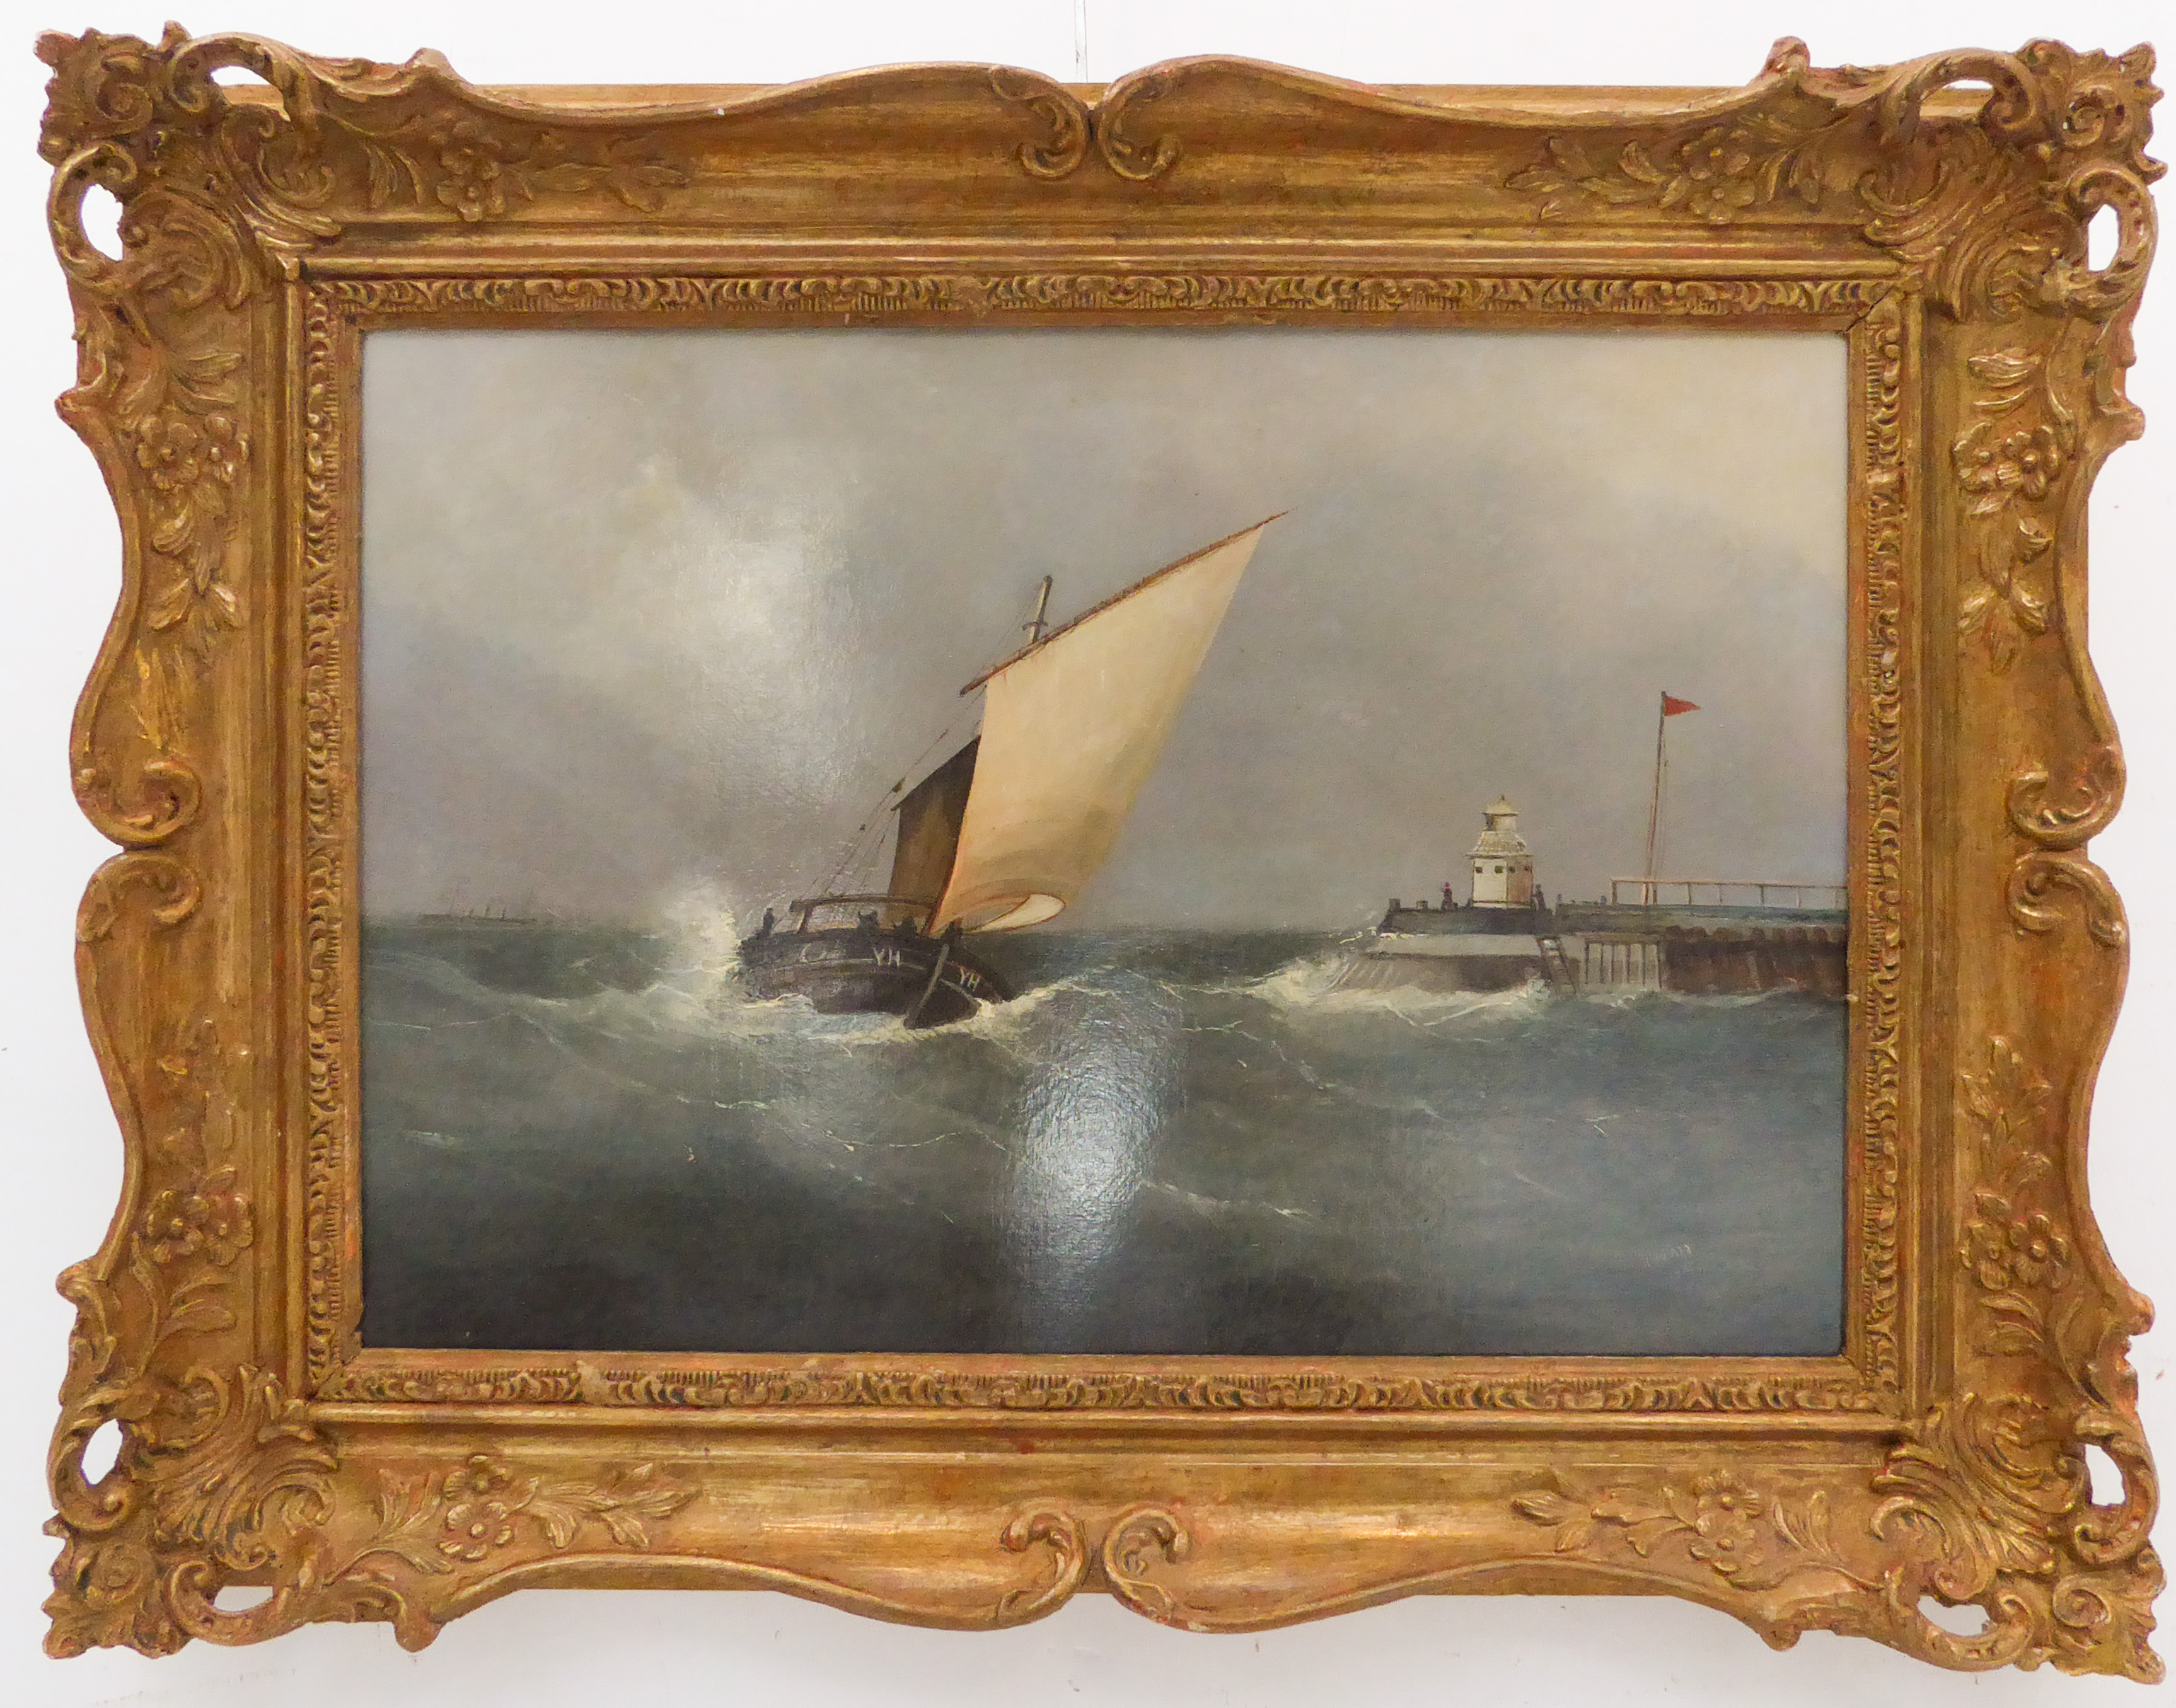 C. HART, 19th century English School - ‘A Fishing Boat out of Yarmouth off a Jetty’, signed and - Image 5 of 8